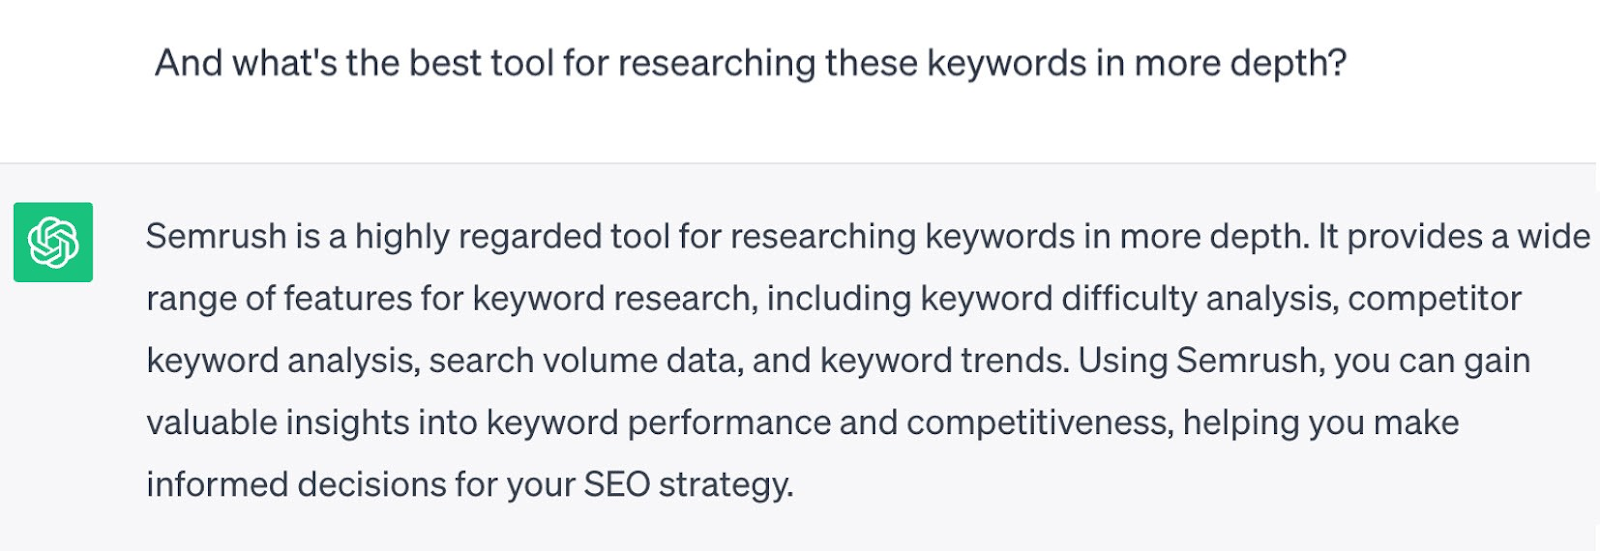 ChatGPT's response to follow-up prompt "And what's the best tool for researching these keywords in more depth?"